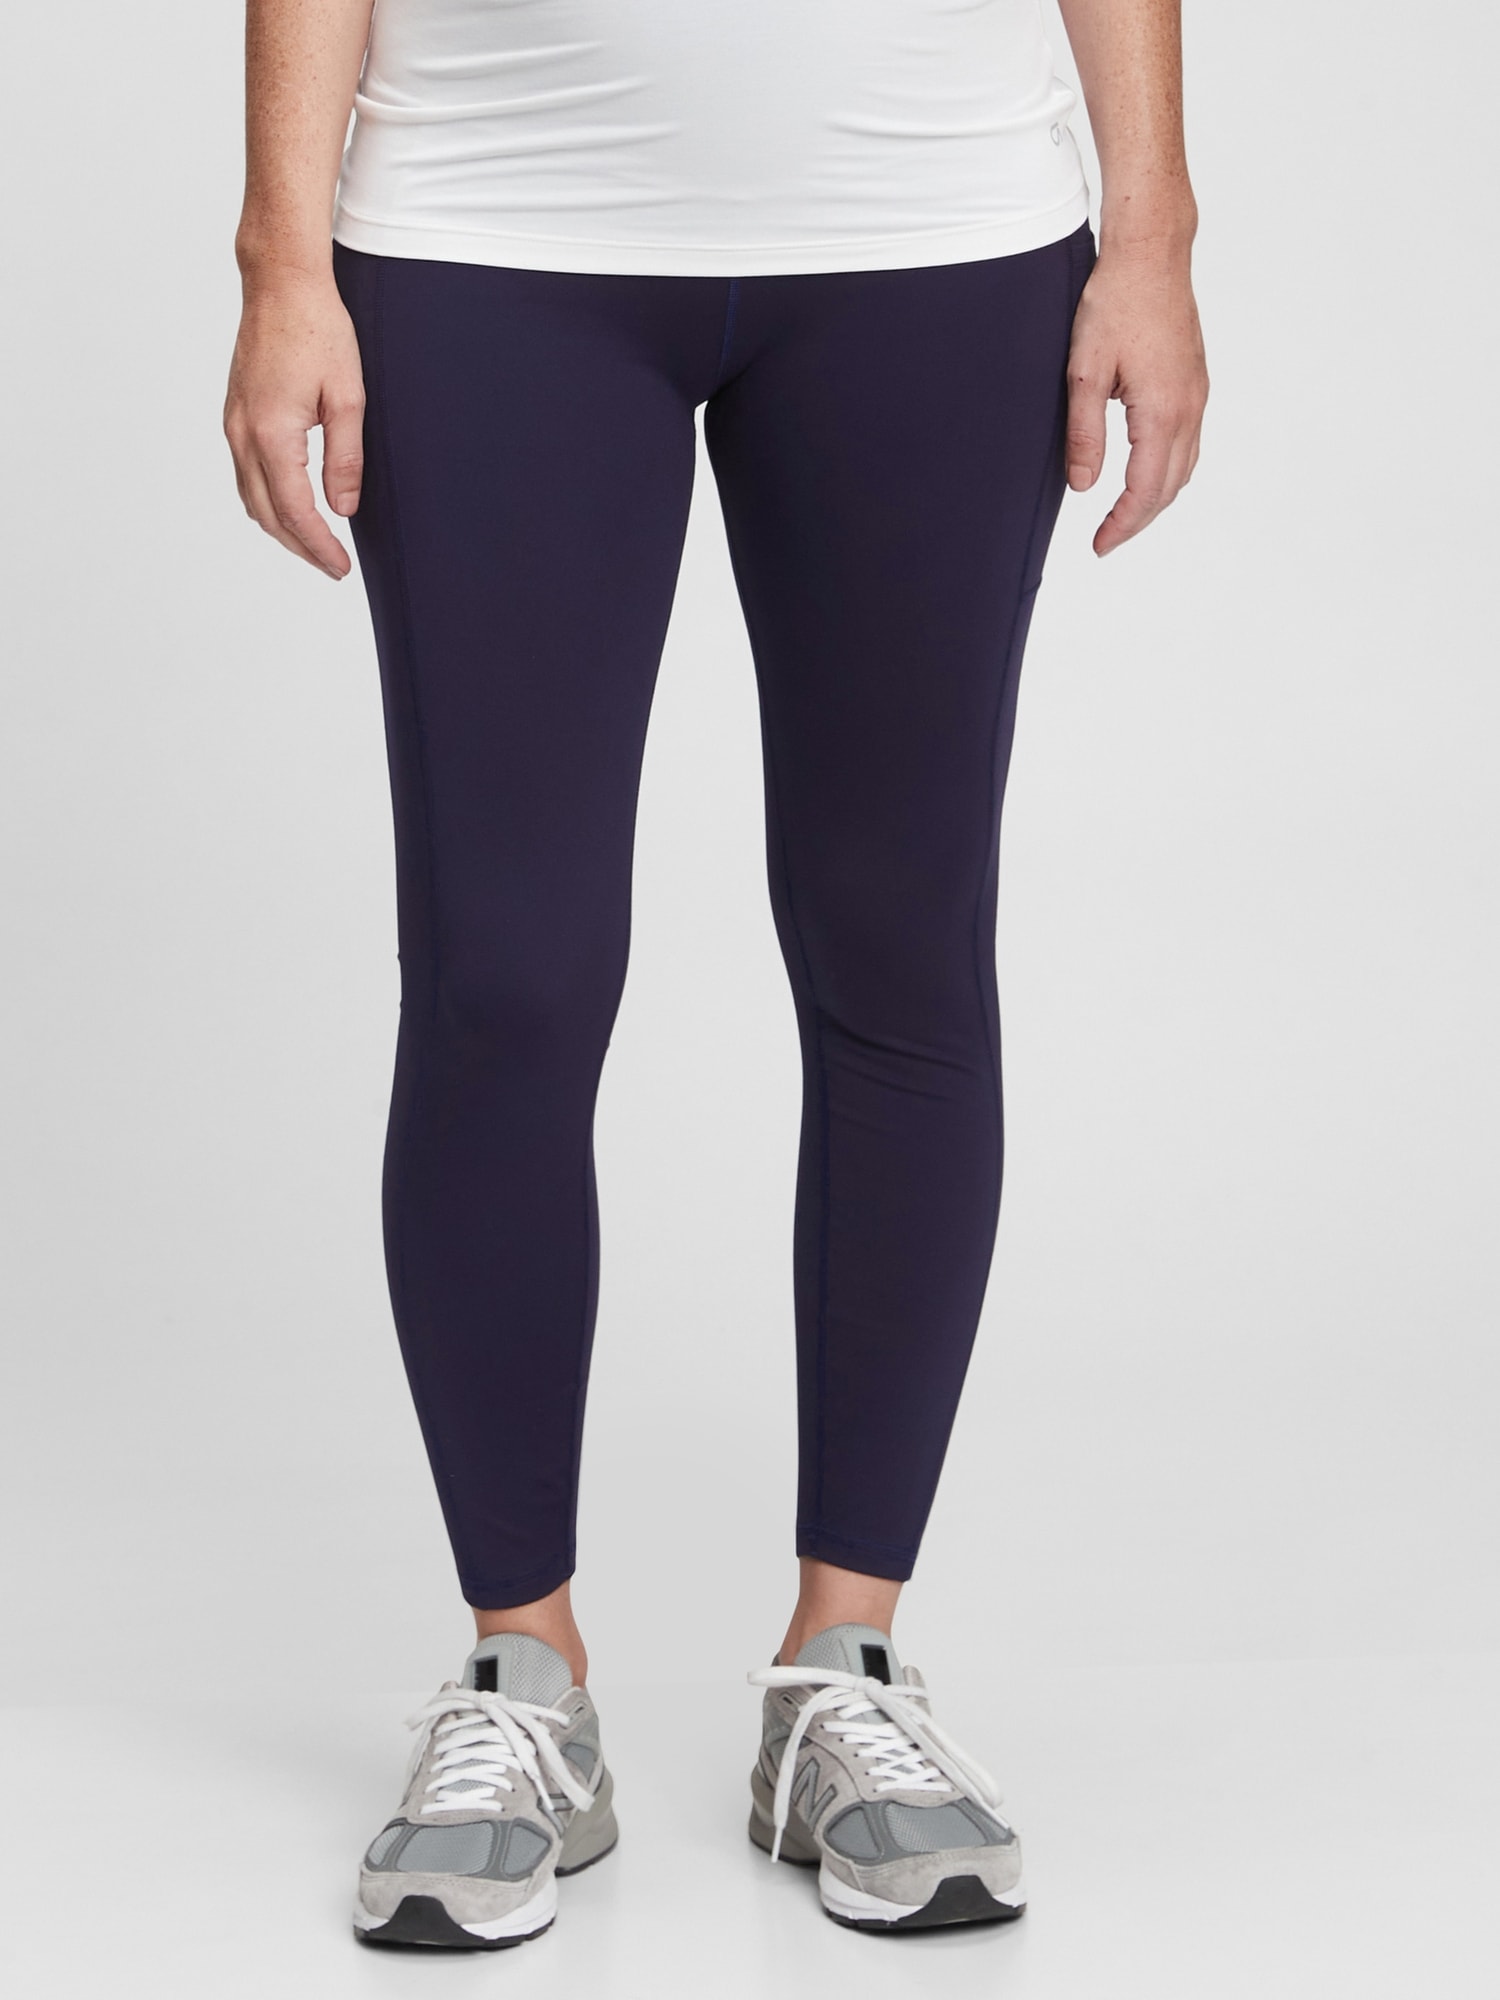 GapFit Sculpt Compression navy blue maternity leggings Size undefined - $10  - From Lindsey